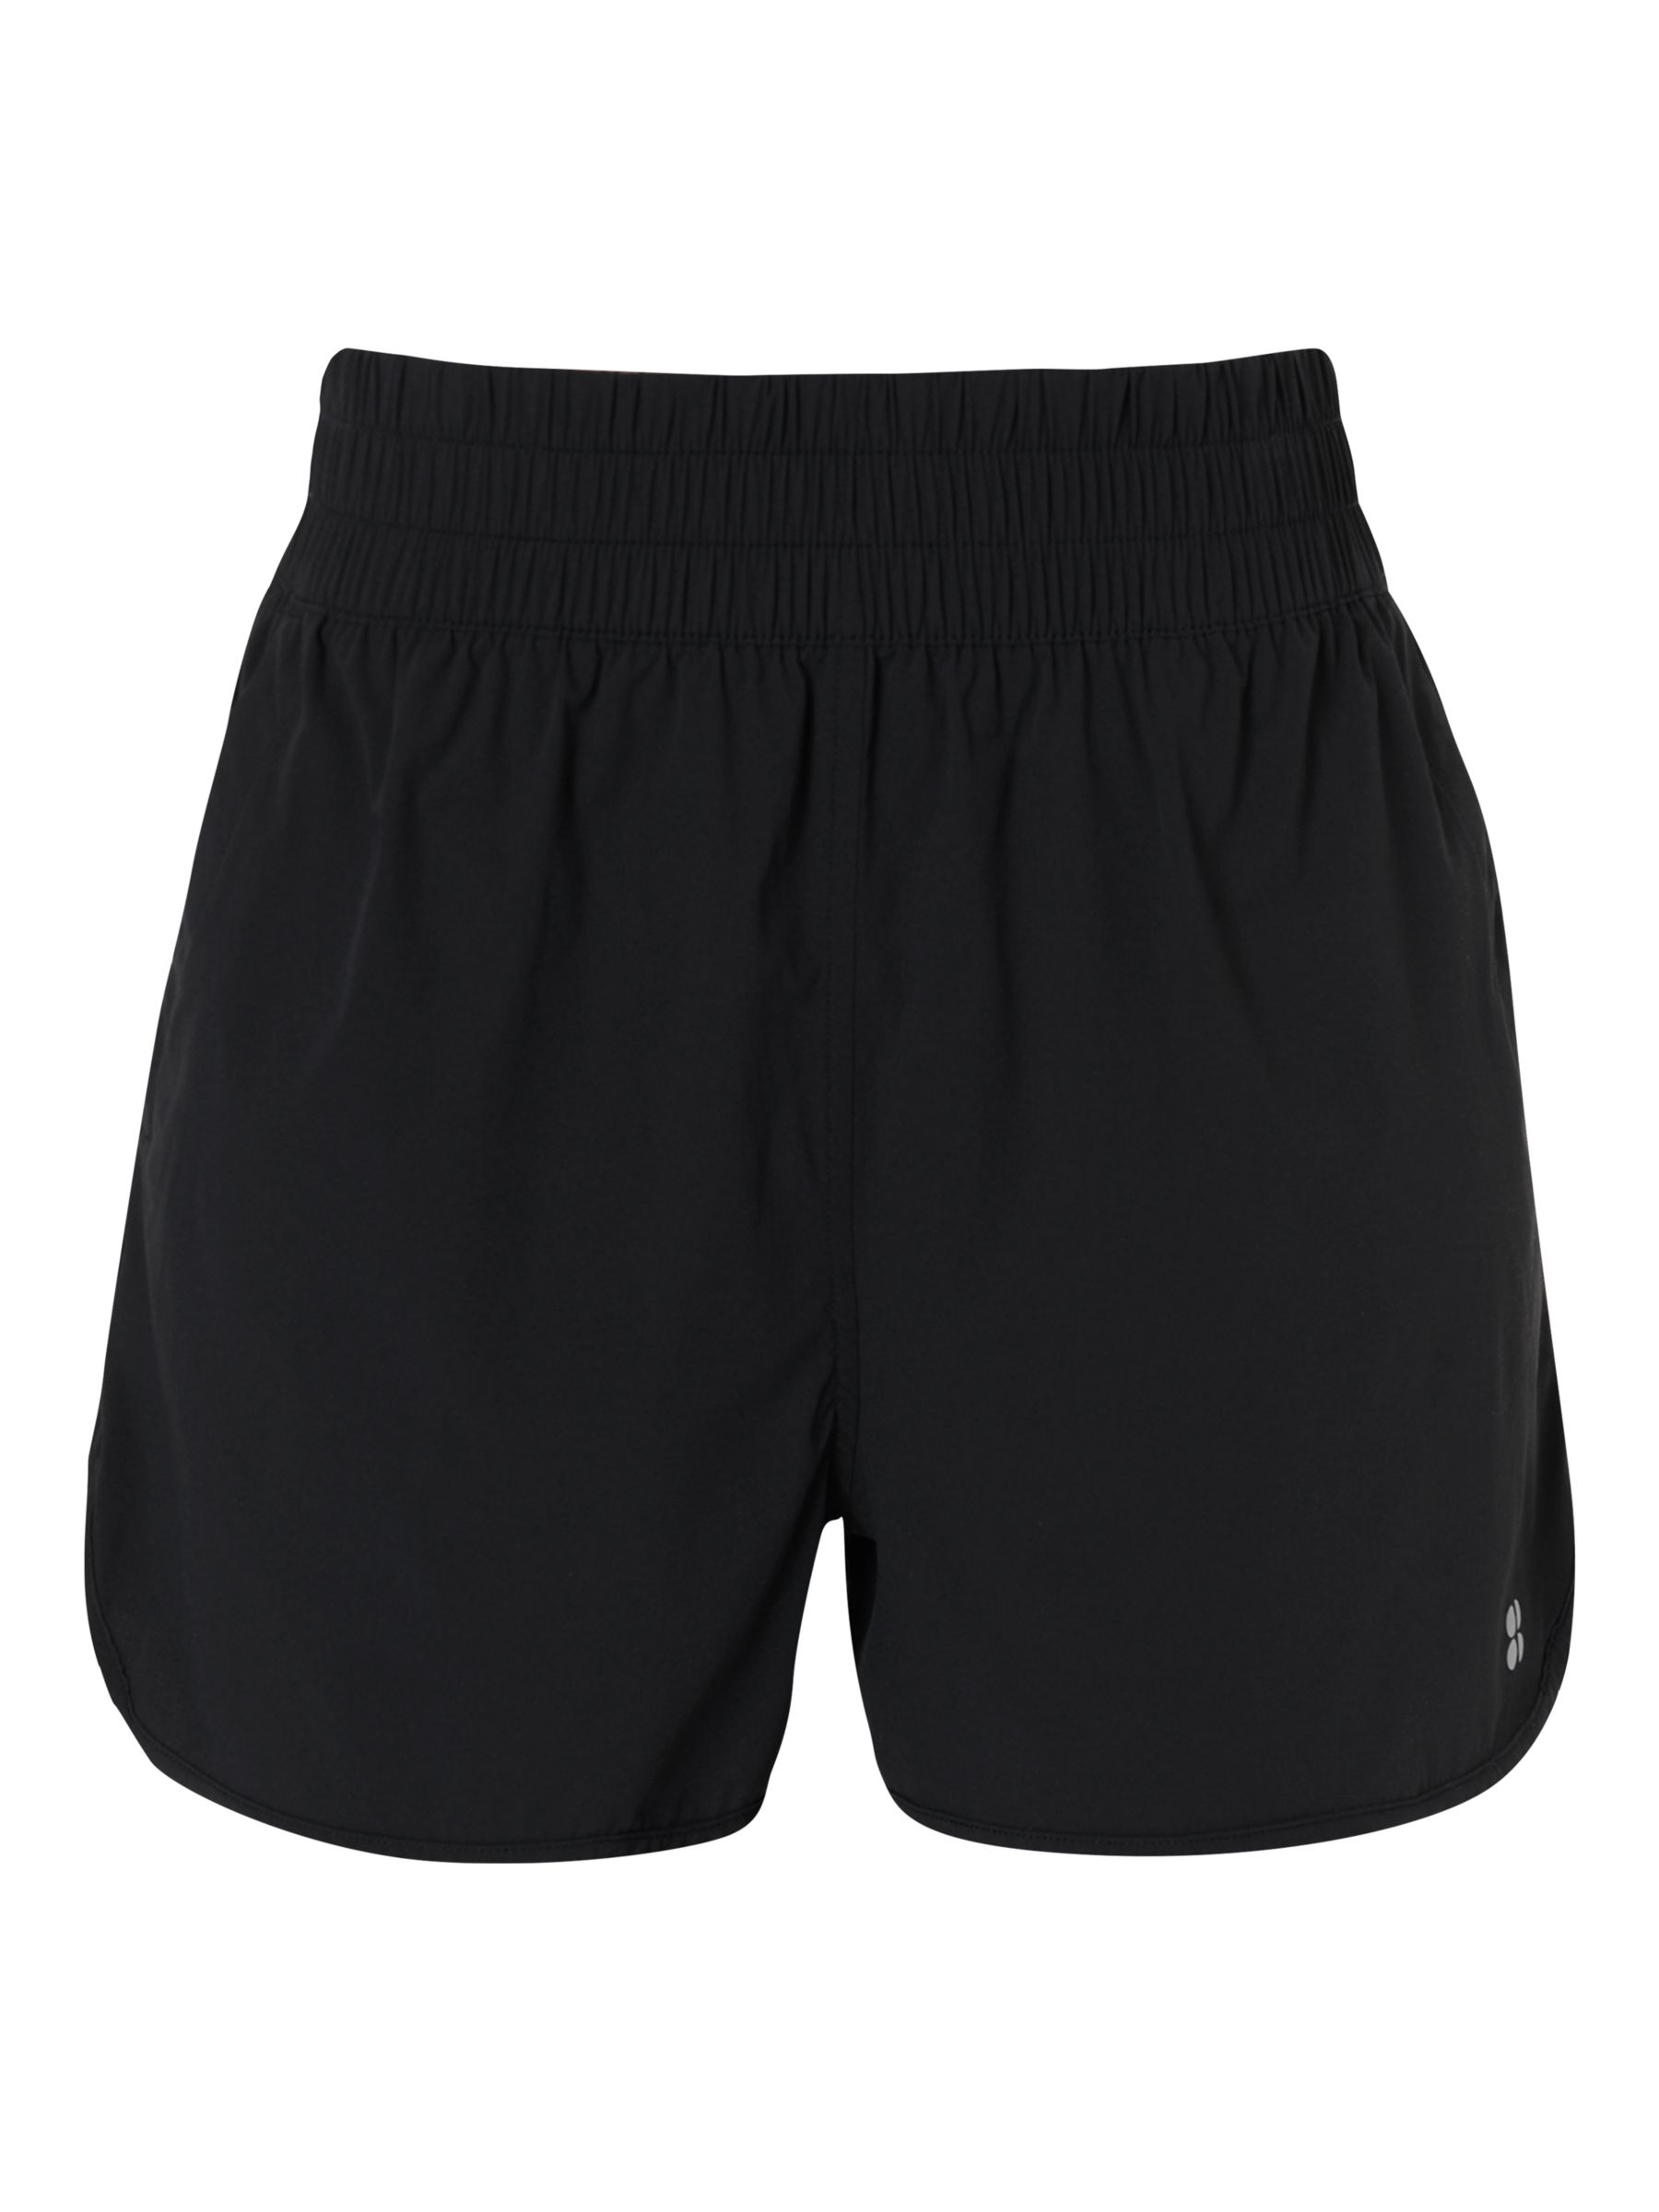 Buy Sweaty Betty Relay Unlined Shell Shorts, Black Online at johnlewis.com